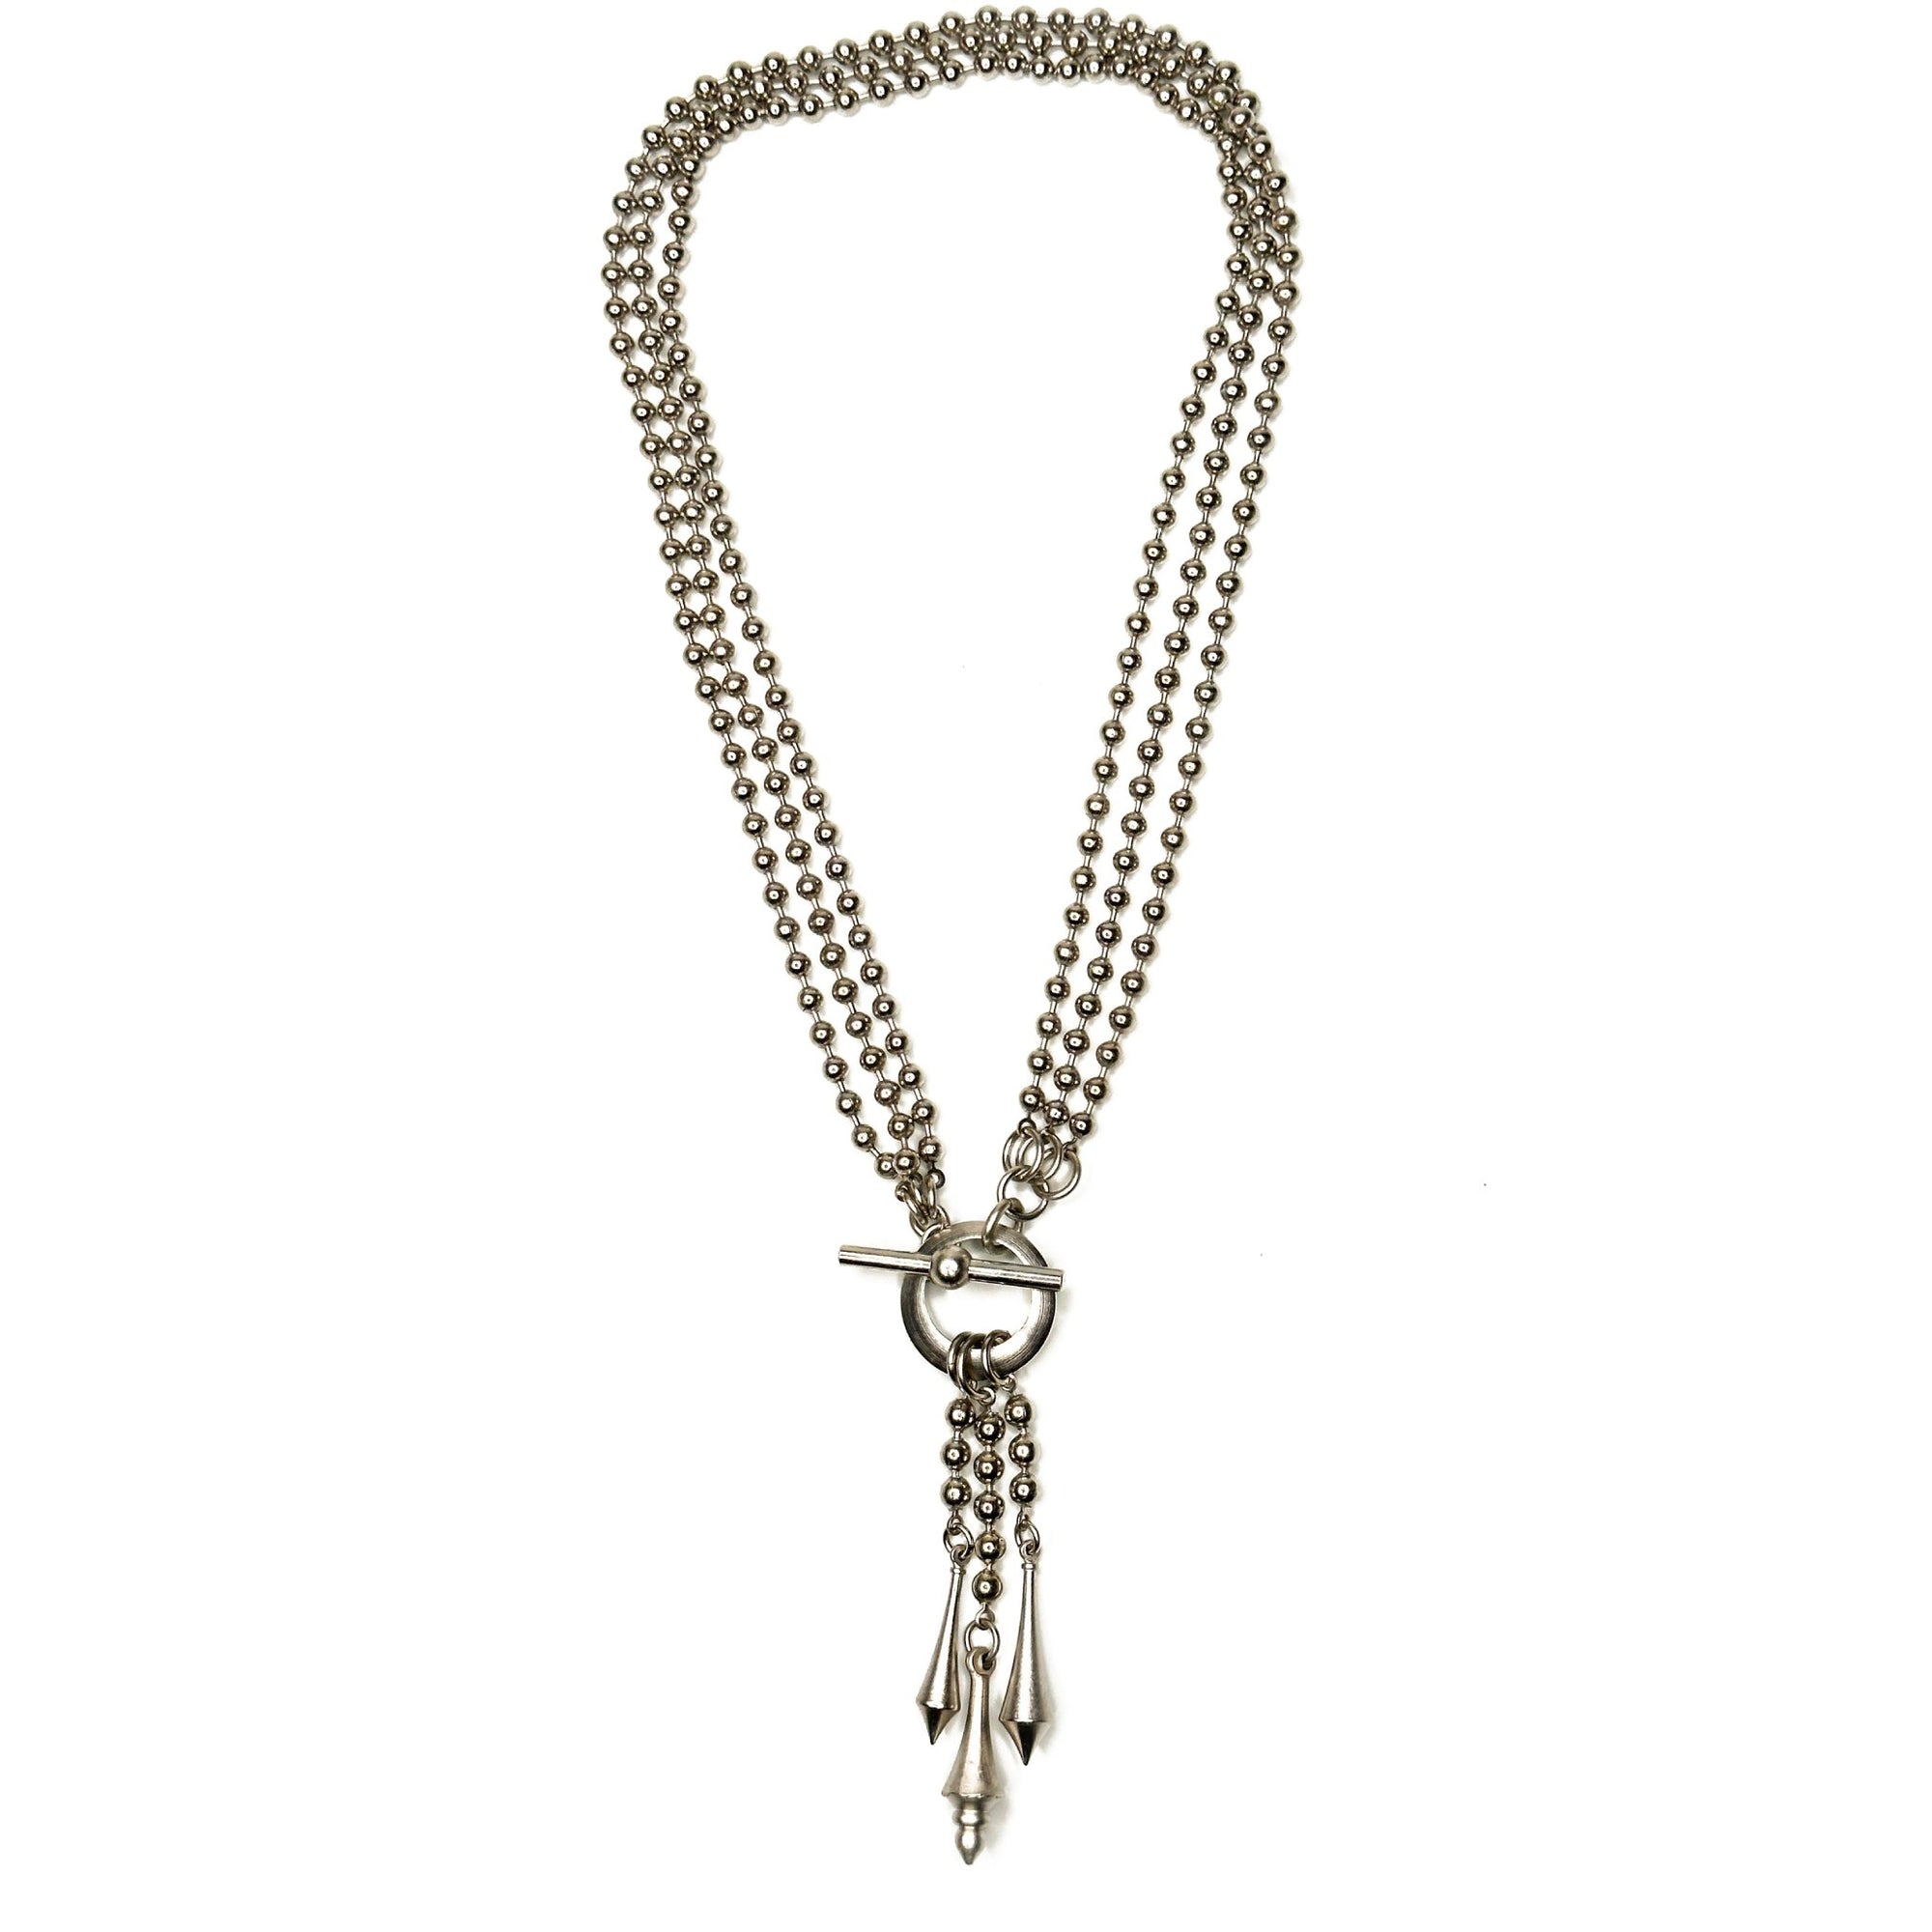 3-Strand Bead Chain Necklace with Geometric Drops | Erica Zap Designs